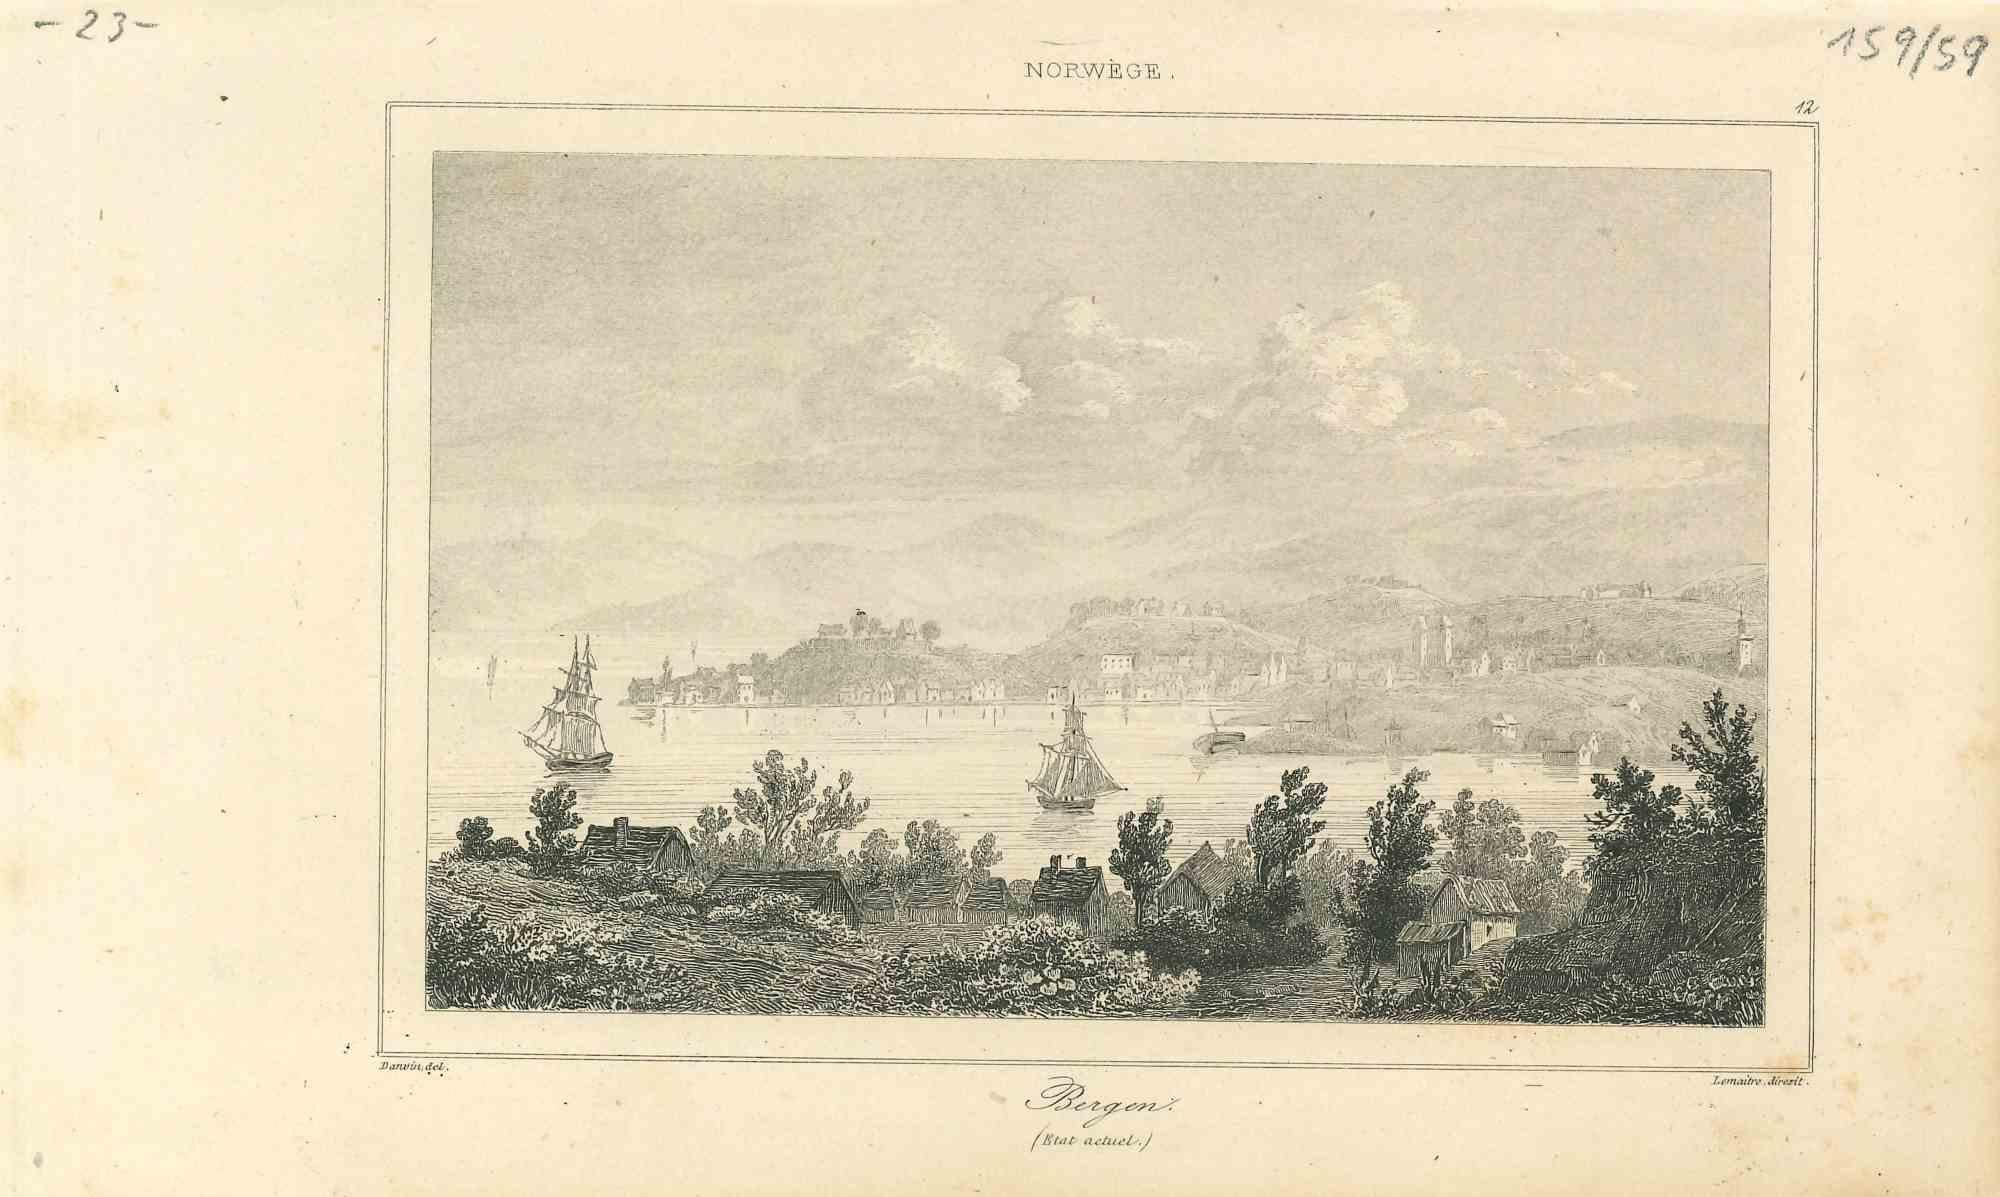 Unknown Landscape Print - Ancient View of  Bergen - Original Lithograph on Paper - Early 19th Century